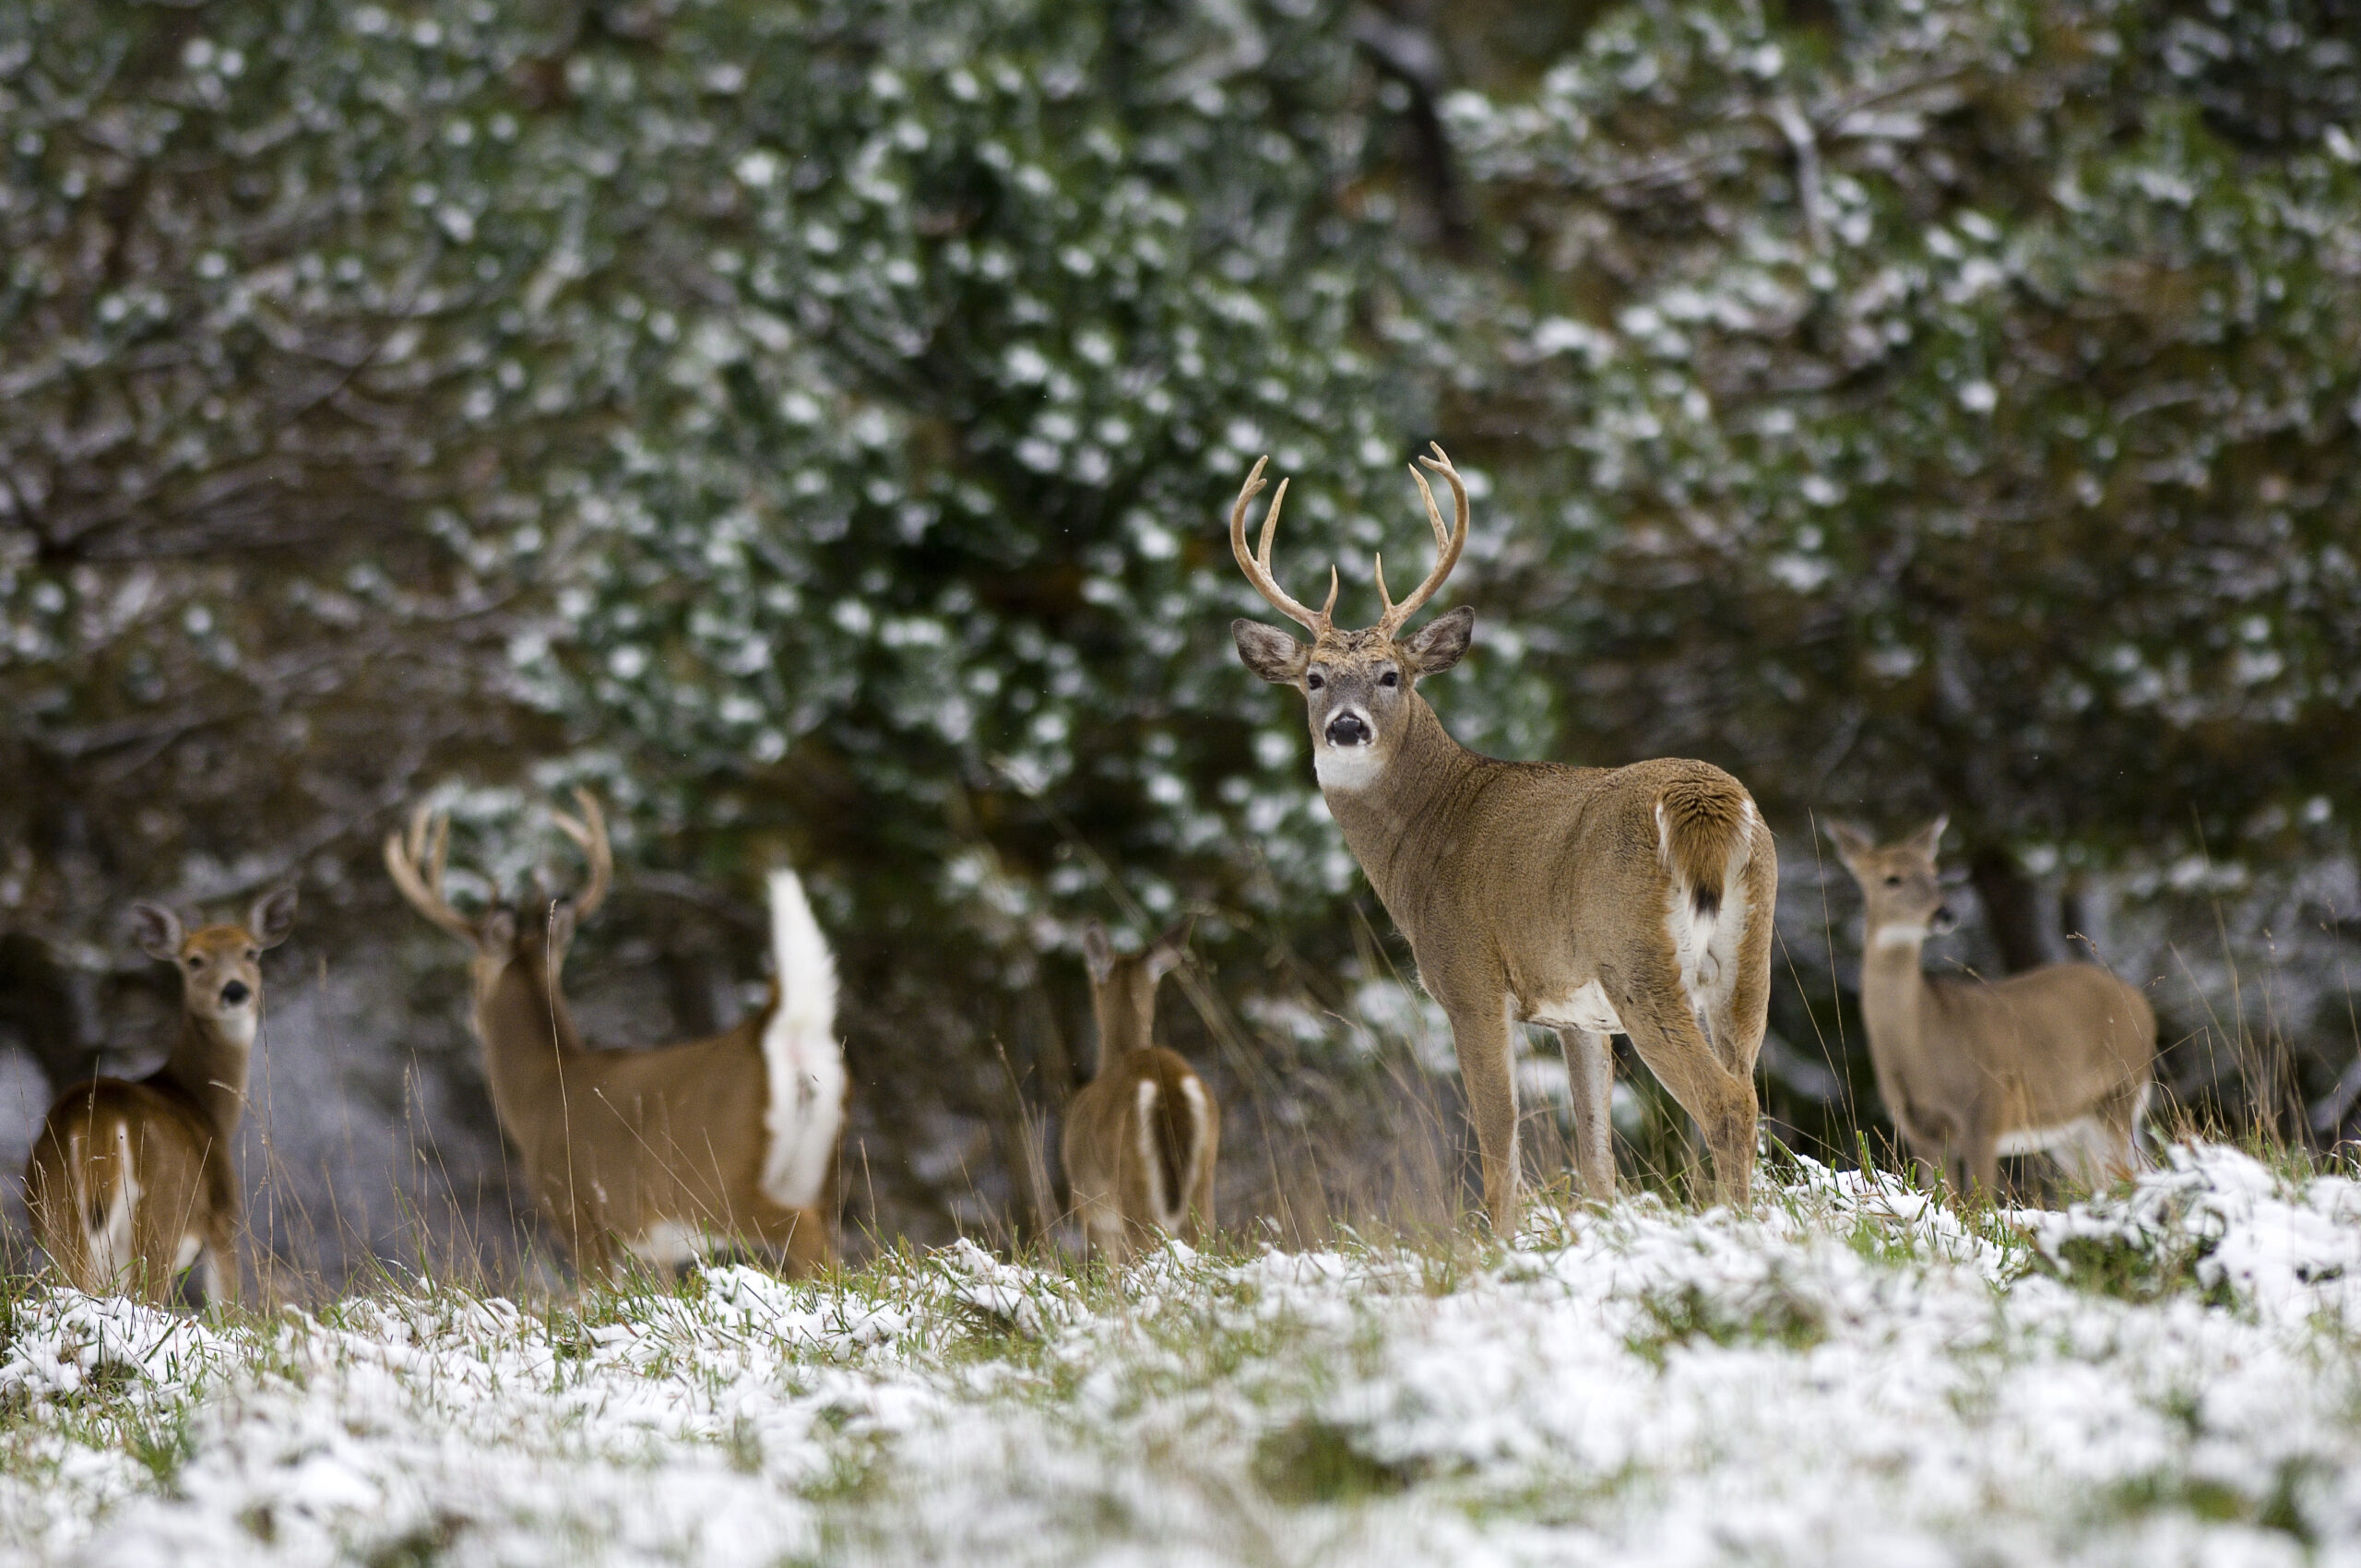 Whitetail deer in the Midwest, where many deer hunters live.